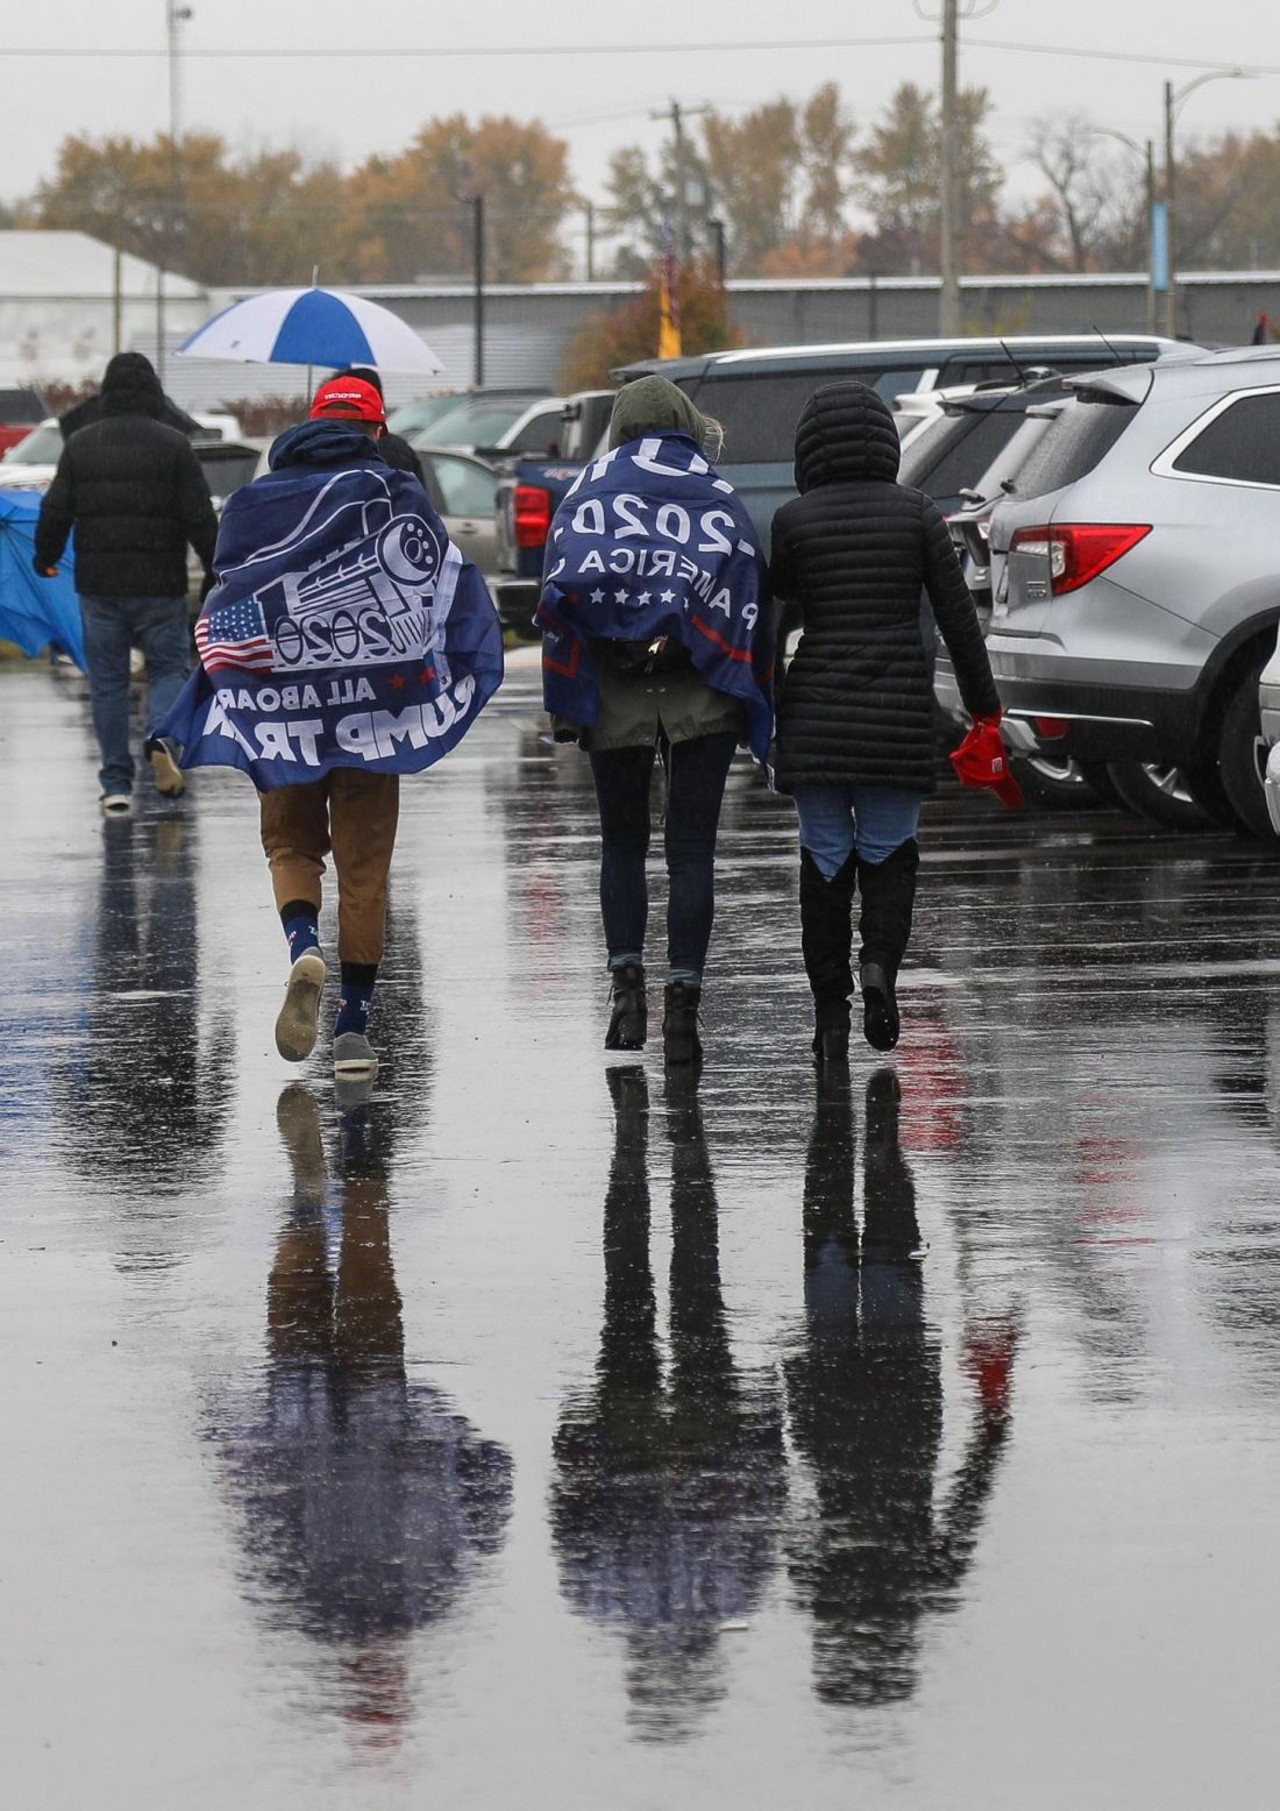 These Trump supporters waited in the rain to go to a rally in Lansing during a pandemic